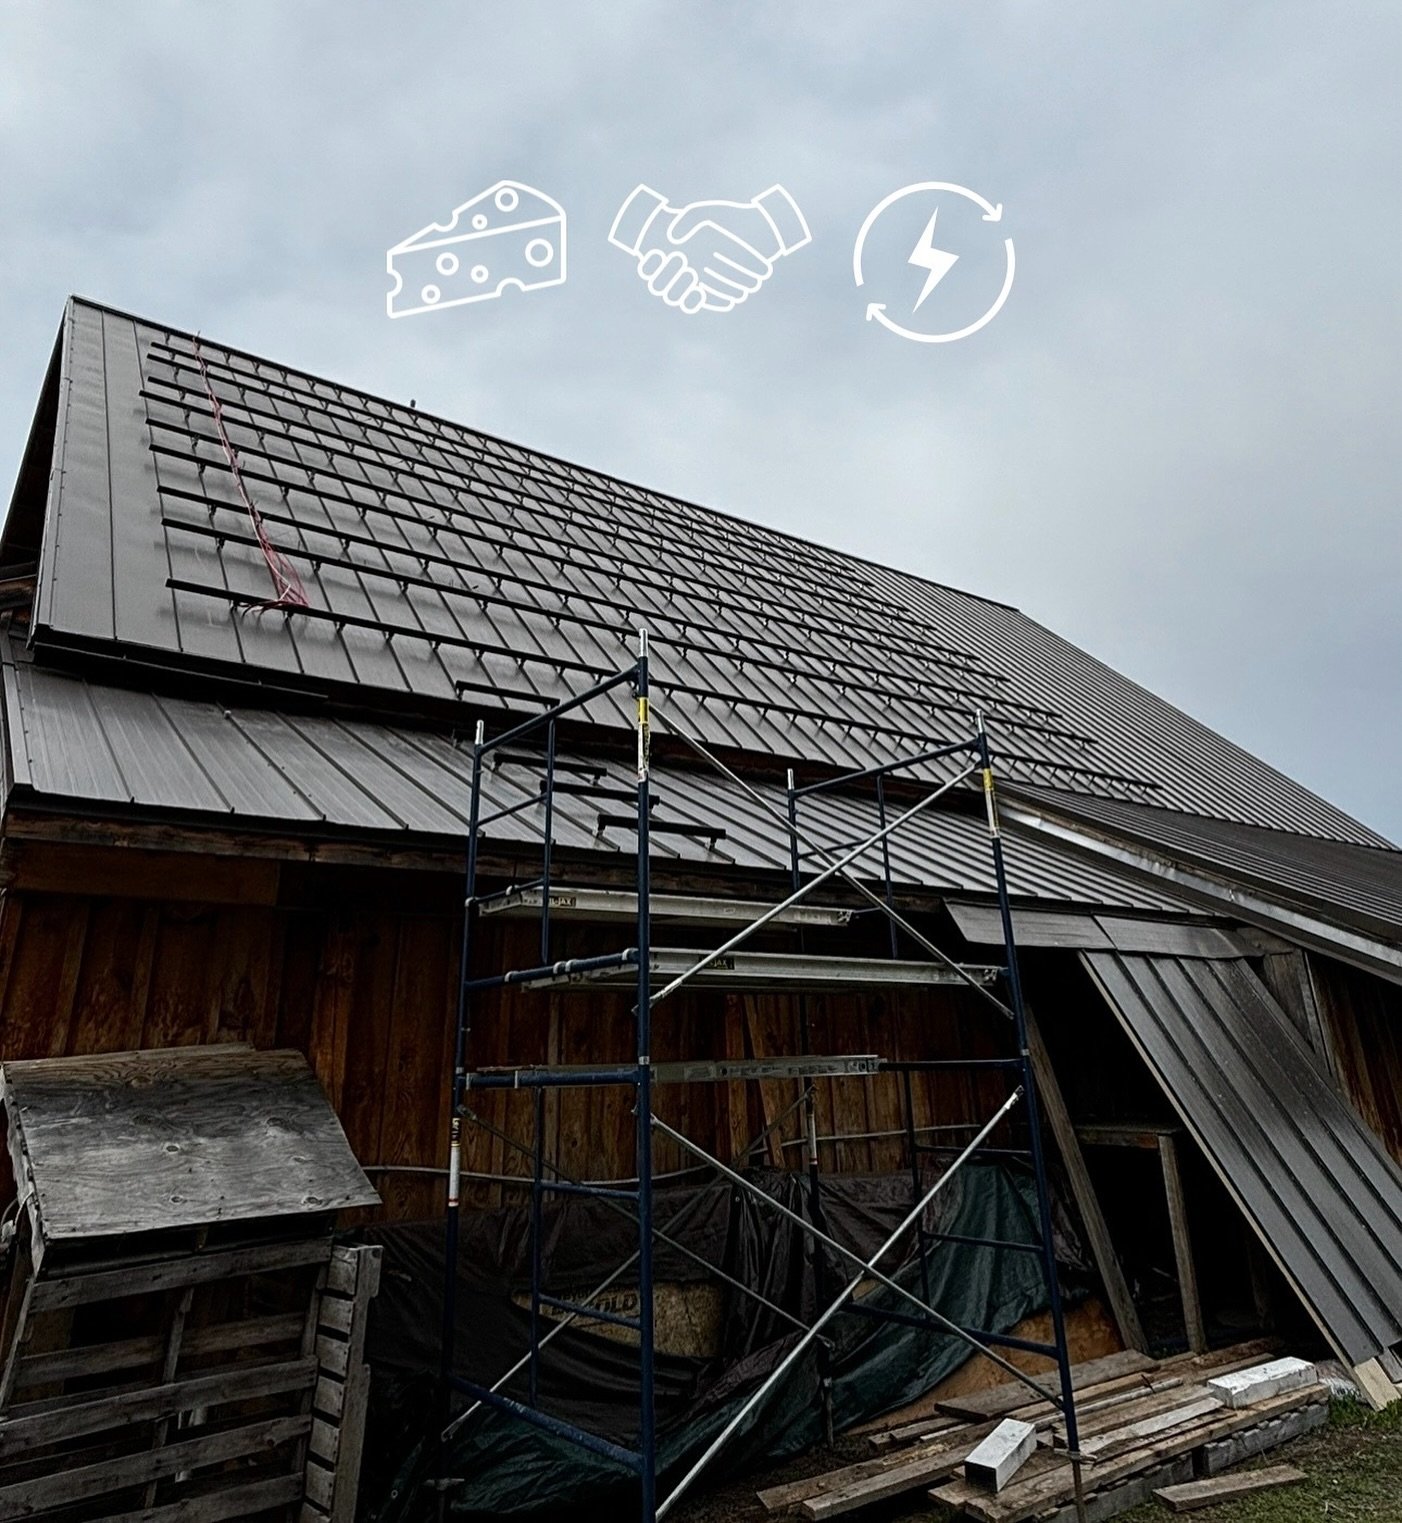 Not only does @cascadiacreamery craft some of the best cheese around, but they&rsquo;re also embracing renewable energy with our solar panels 🌞♻️ Excited for the finished product&mdash;stay tuned and grab some of their cheese! It&rsquo;s delicious ?